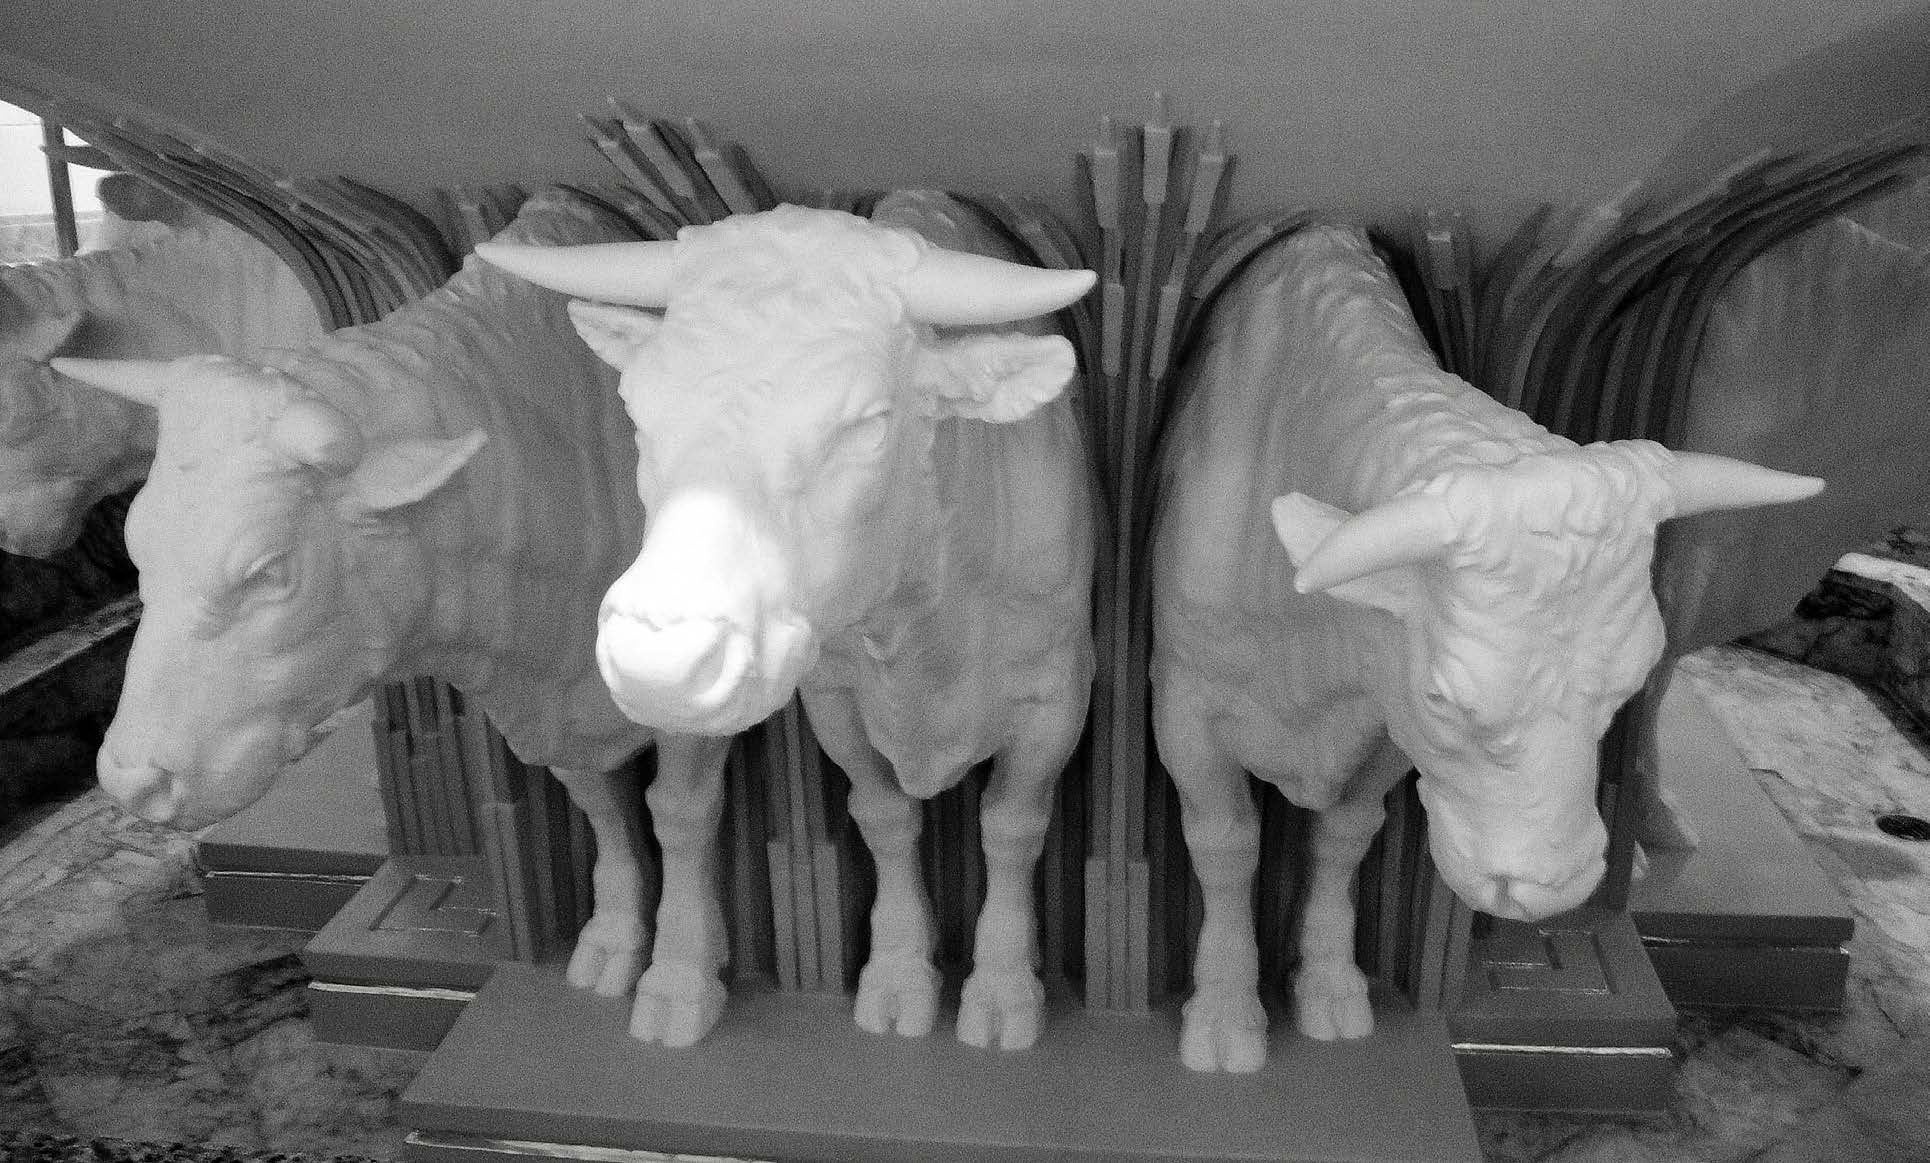 A set of three distinct oxen were sculpted and then reproduced three more times, giving the effect that all oxen look different when viewed from various angles. © 2010 IRI. Used with permission.